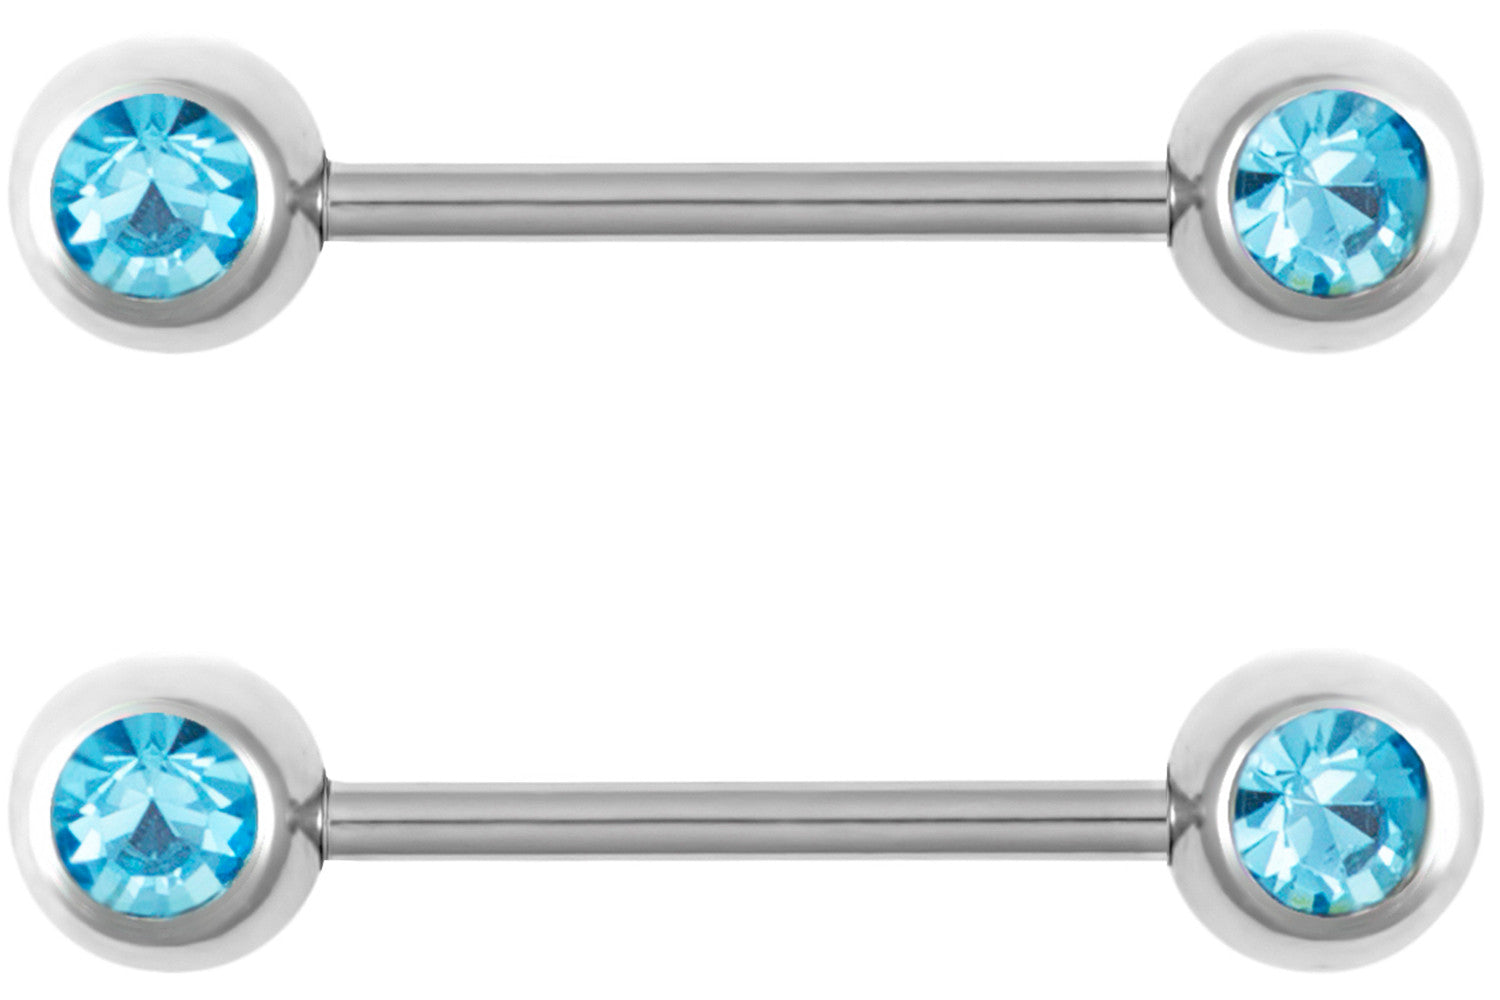 These 14 gauge nipple piercing barbells are made with surgical grade 316L Stainless Steel. These feature front facing crystal gems and they come as a pair. The barbell (portion that goes through the piercing) is 5/8" in length and the balls are 6 mm wide. This body jewelry is hypoallergenic and nickel free.